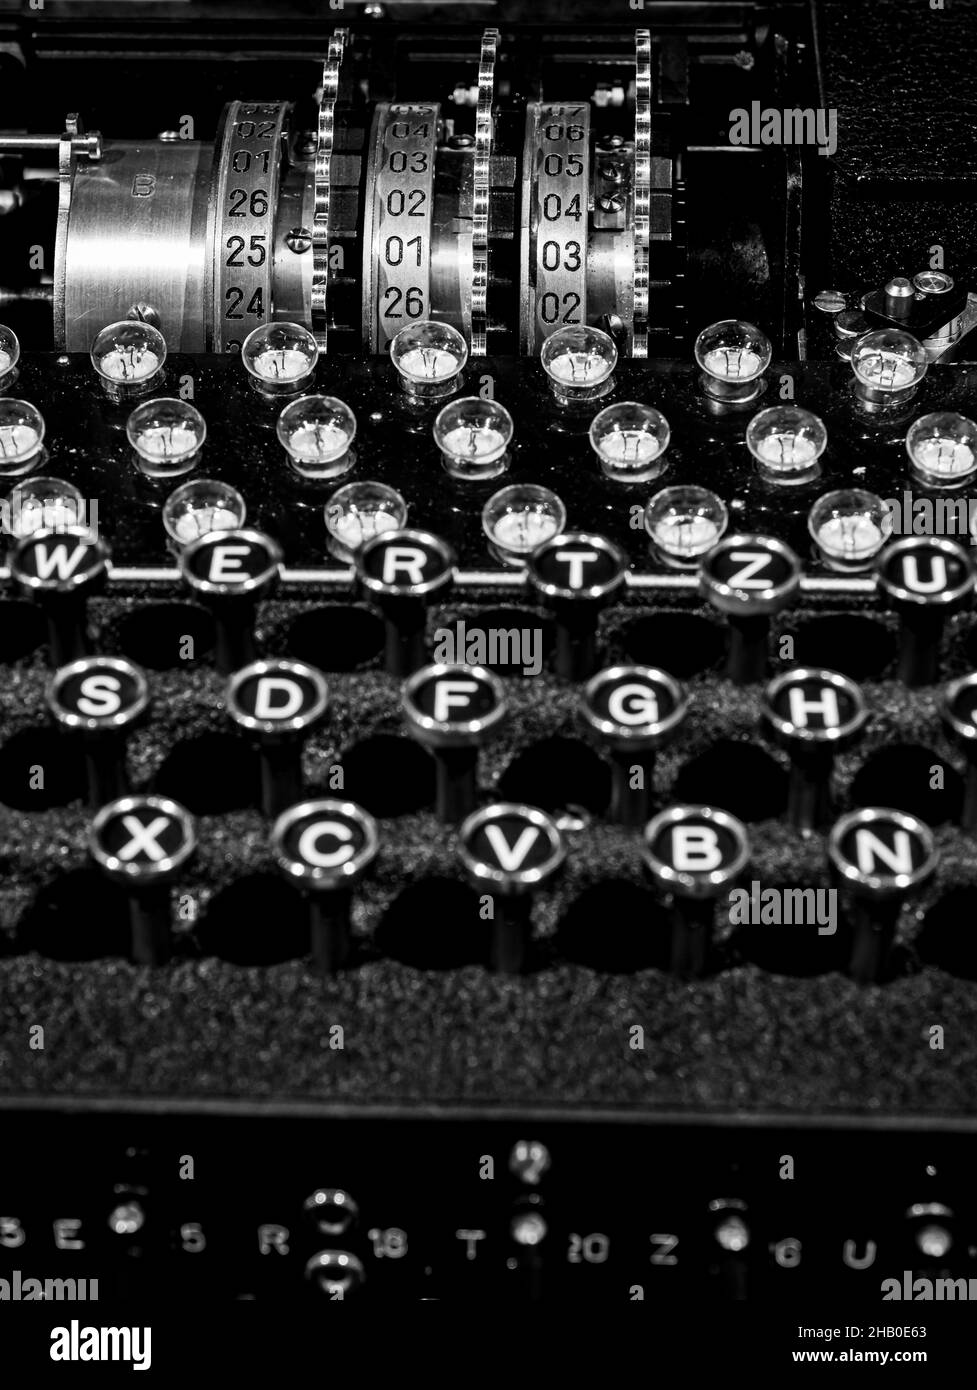 The plugboard, keyboard and rotors from a historic German World War 2 Enigma machine on display at Bletchley Park, Buckinghamshire. Stock Photo